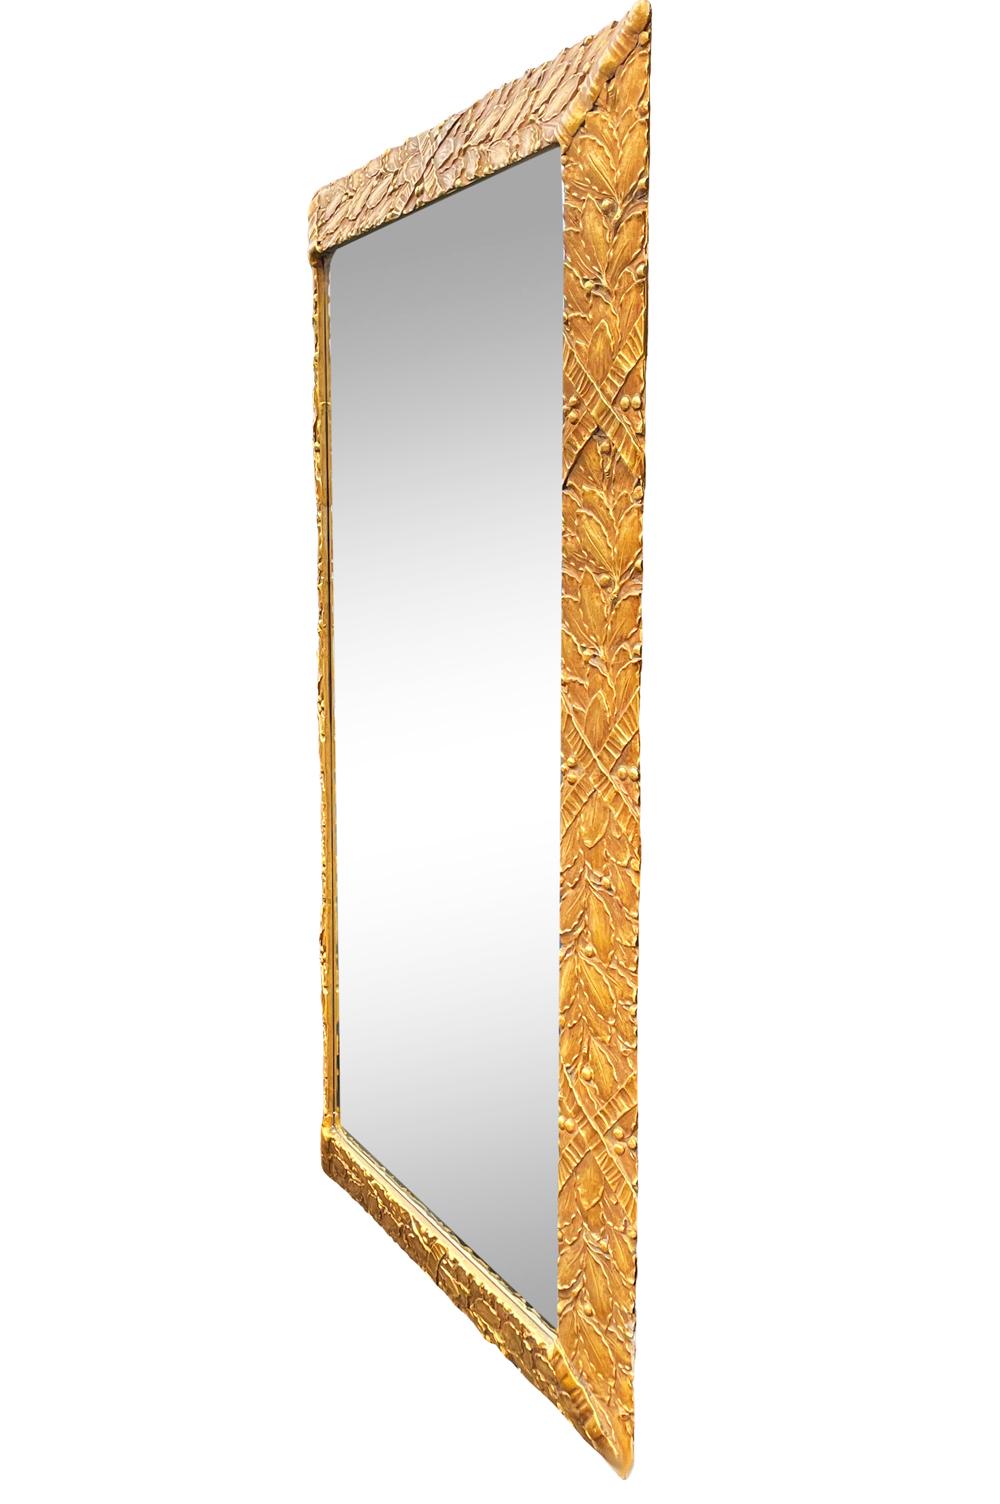 Hollywood Regency Large Italian Rectangular Mirror in Gold Gilded Carved Wood For Sale 4